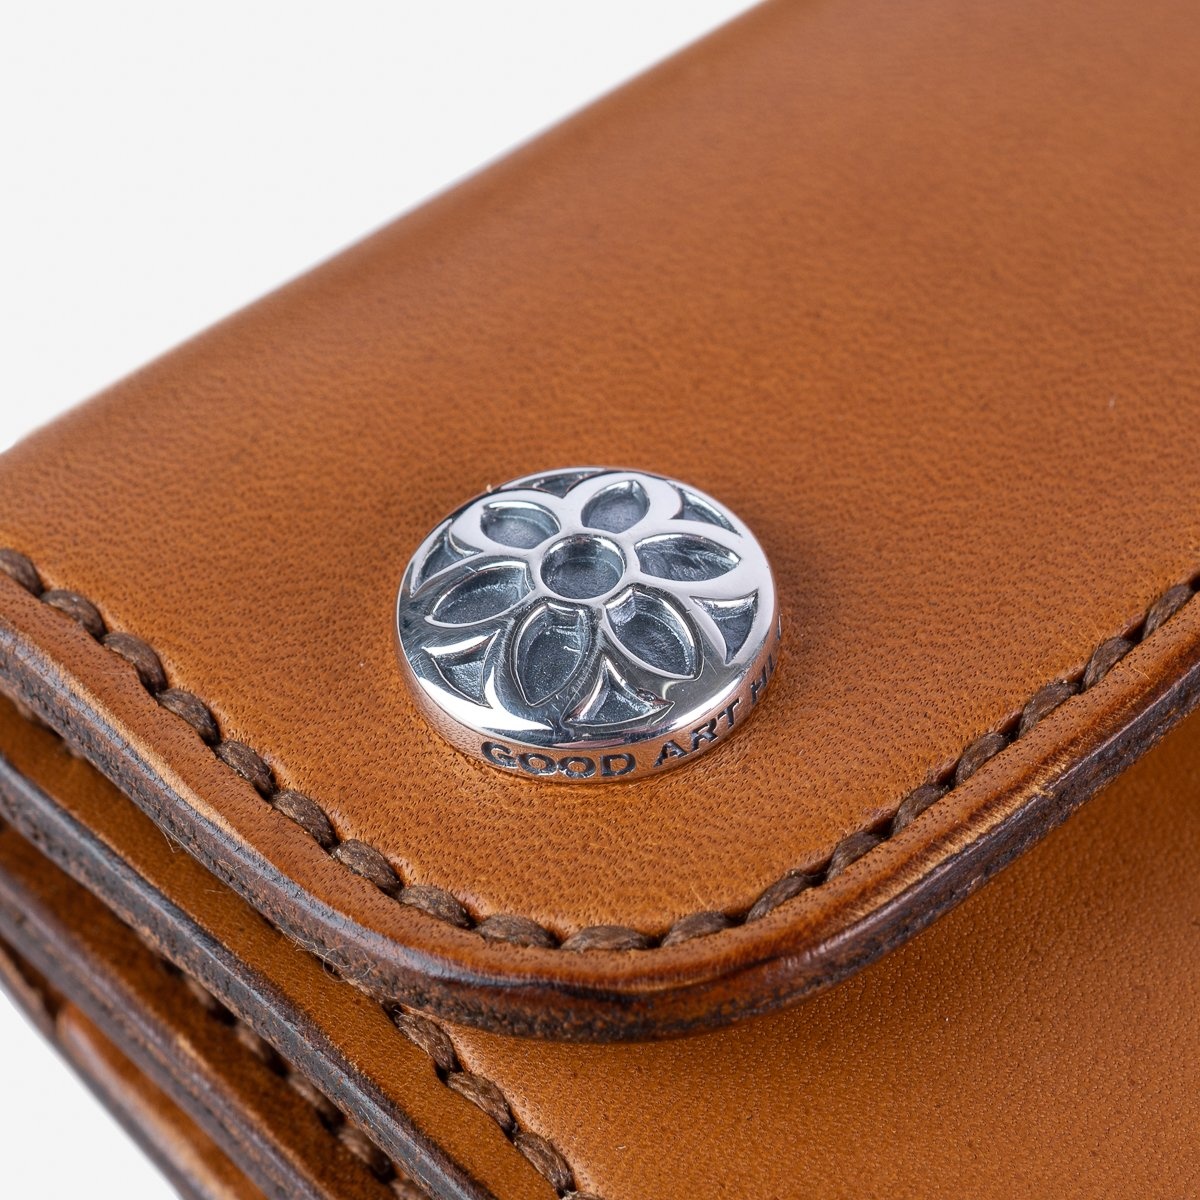 LE-ANSW-BR GOOD ART HLYWD Army/Navy Surplus Wallet w/ Sterling Silver Rosette Snaps and Rosette Prin - 6